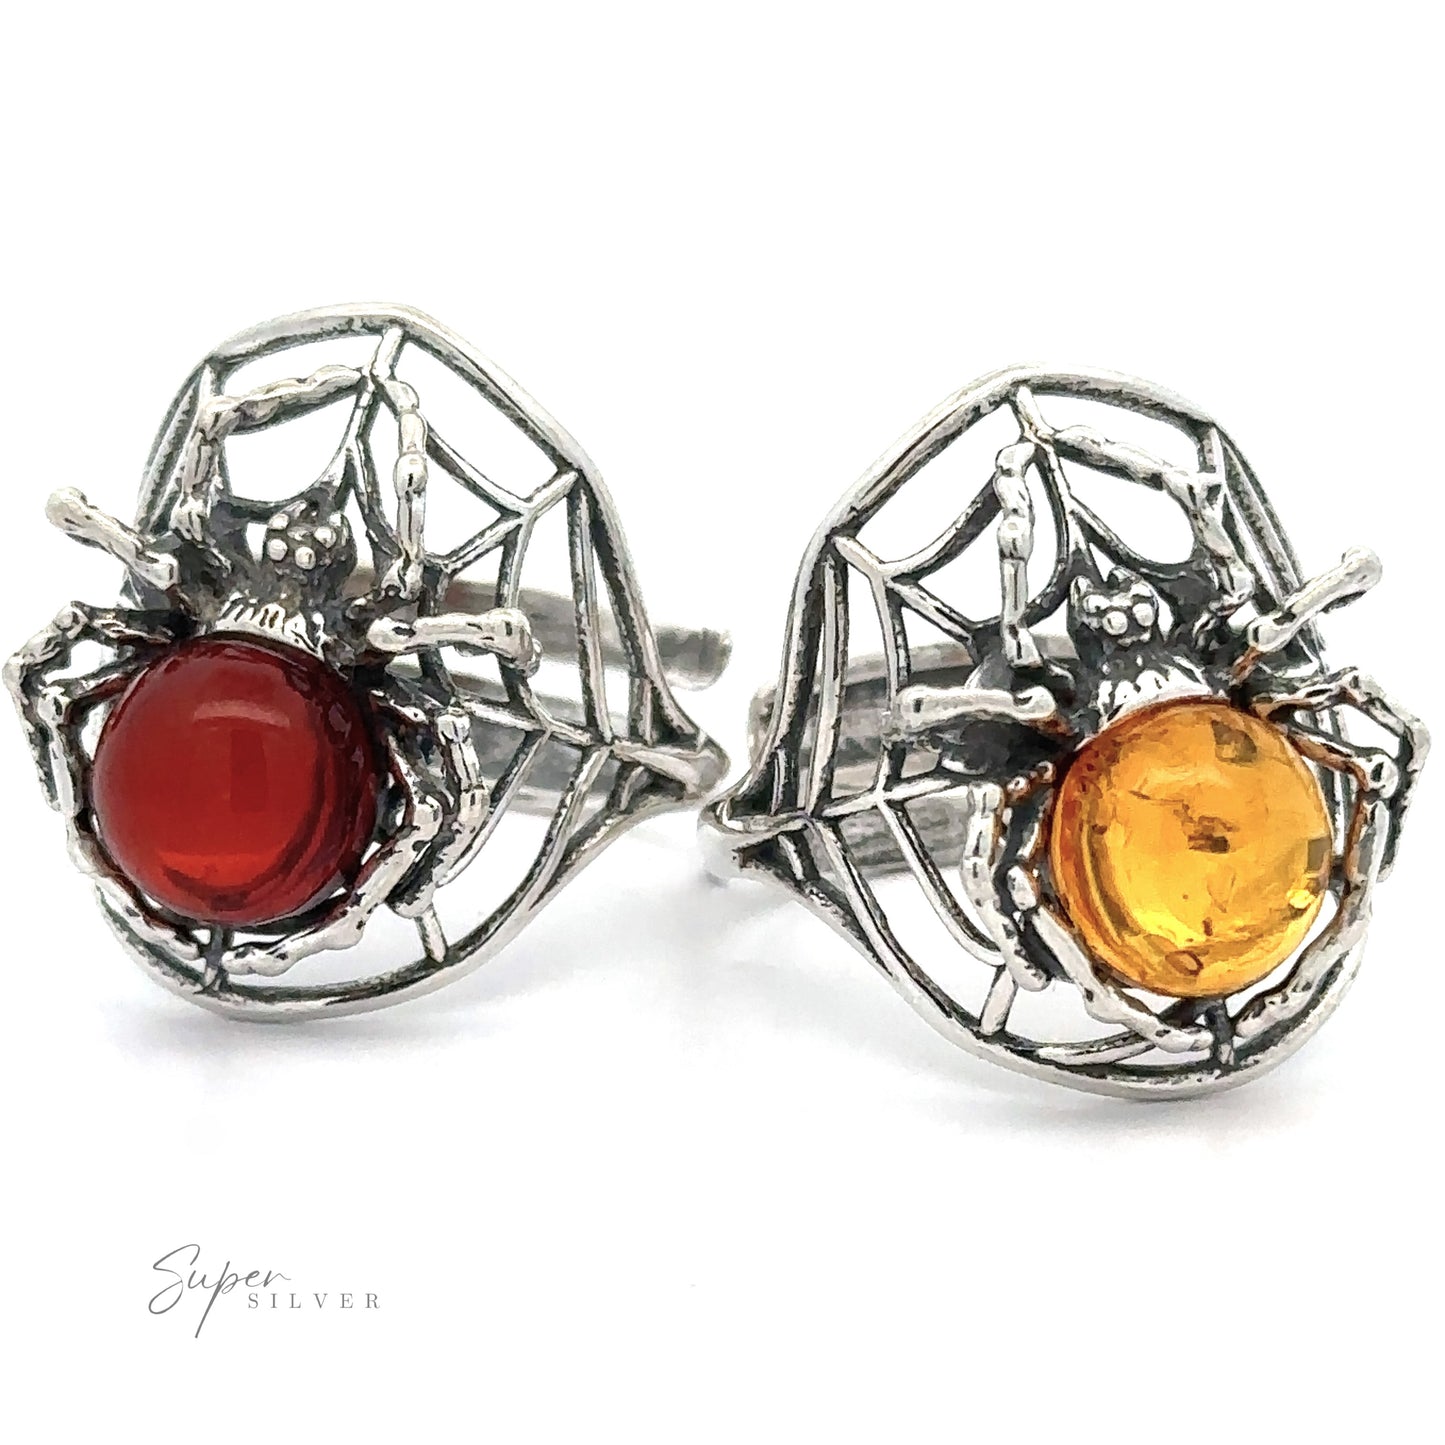 Two Entrancing Adjustable Baltic Amber Spider Rings (one red, one cognac Baltic amber) displayed on a white background.